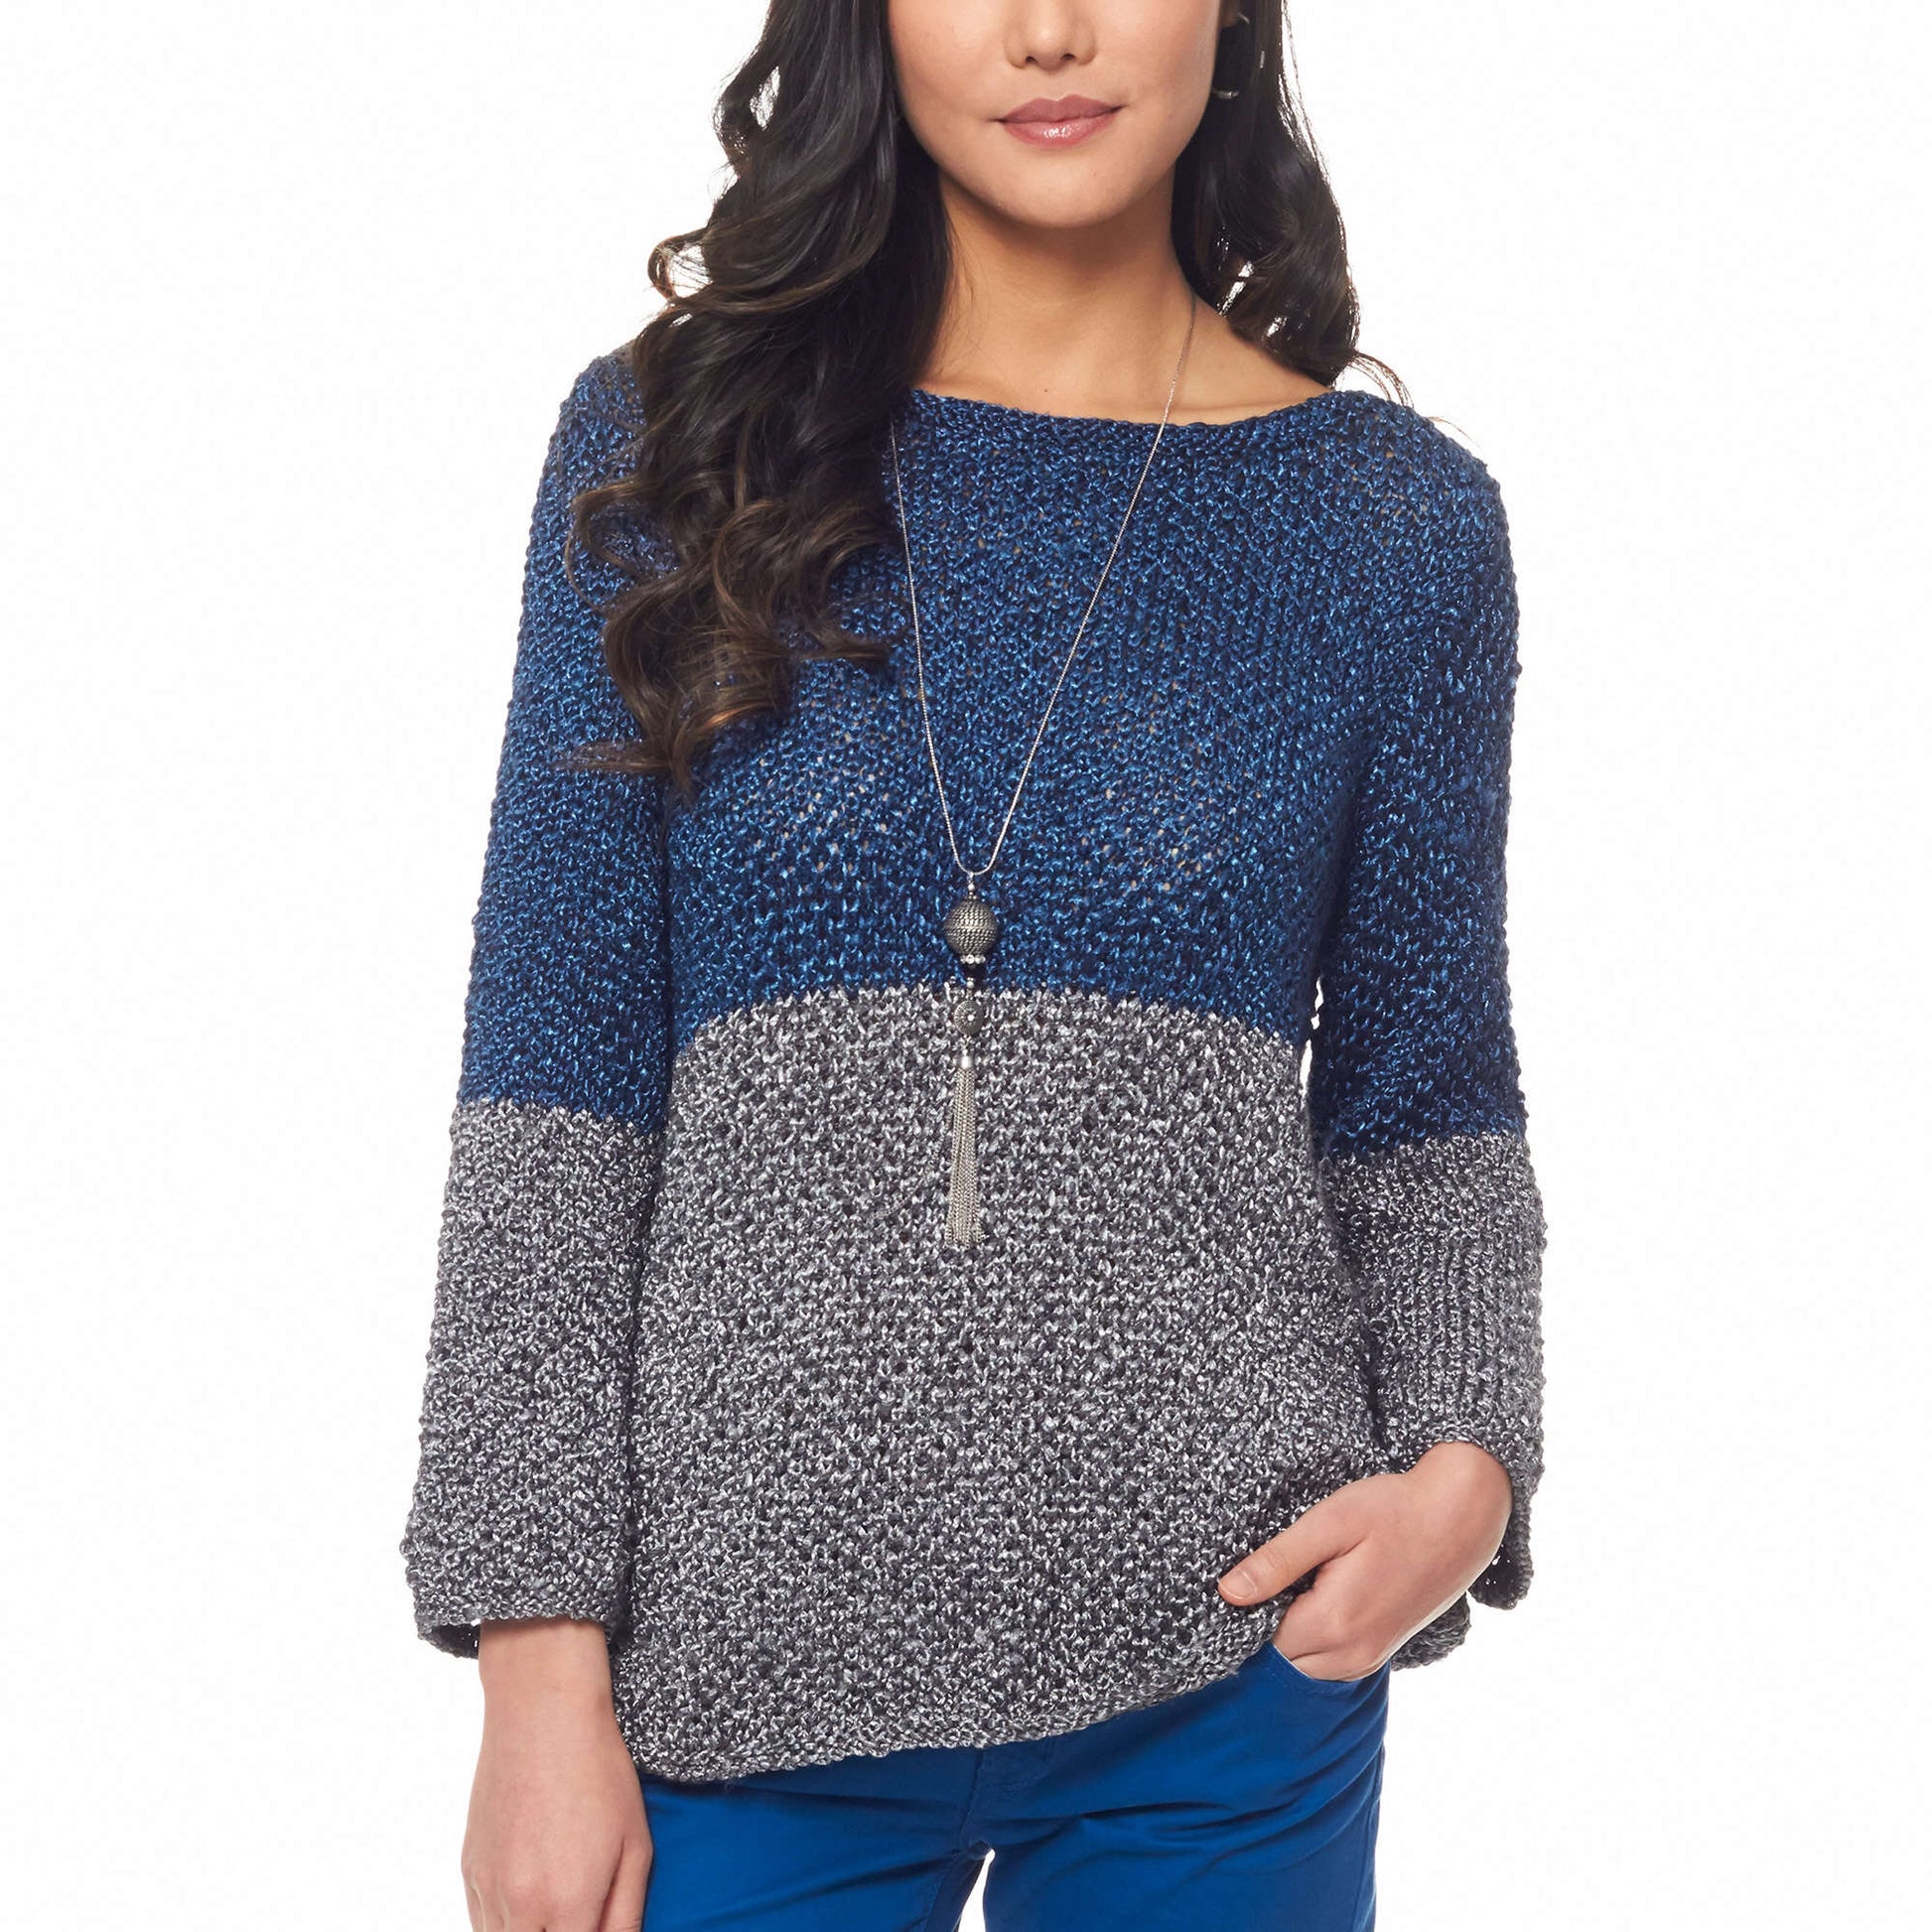 Free Patons Knit Color Dipped Top Pattern